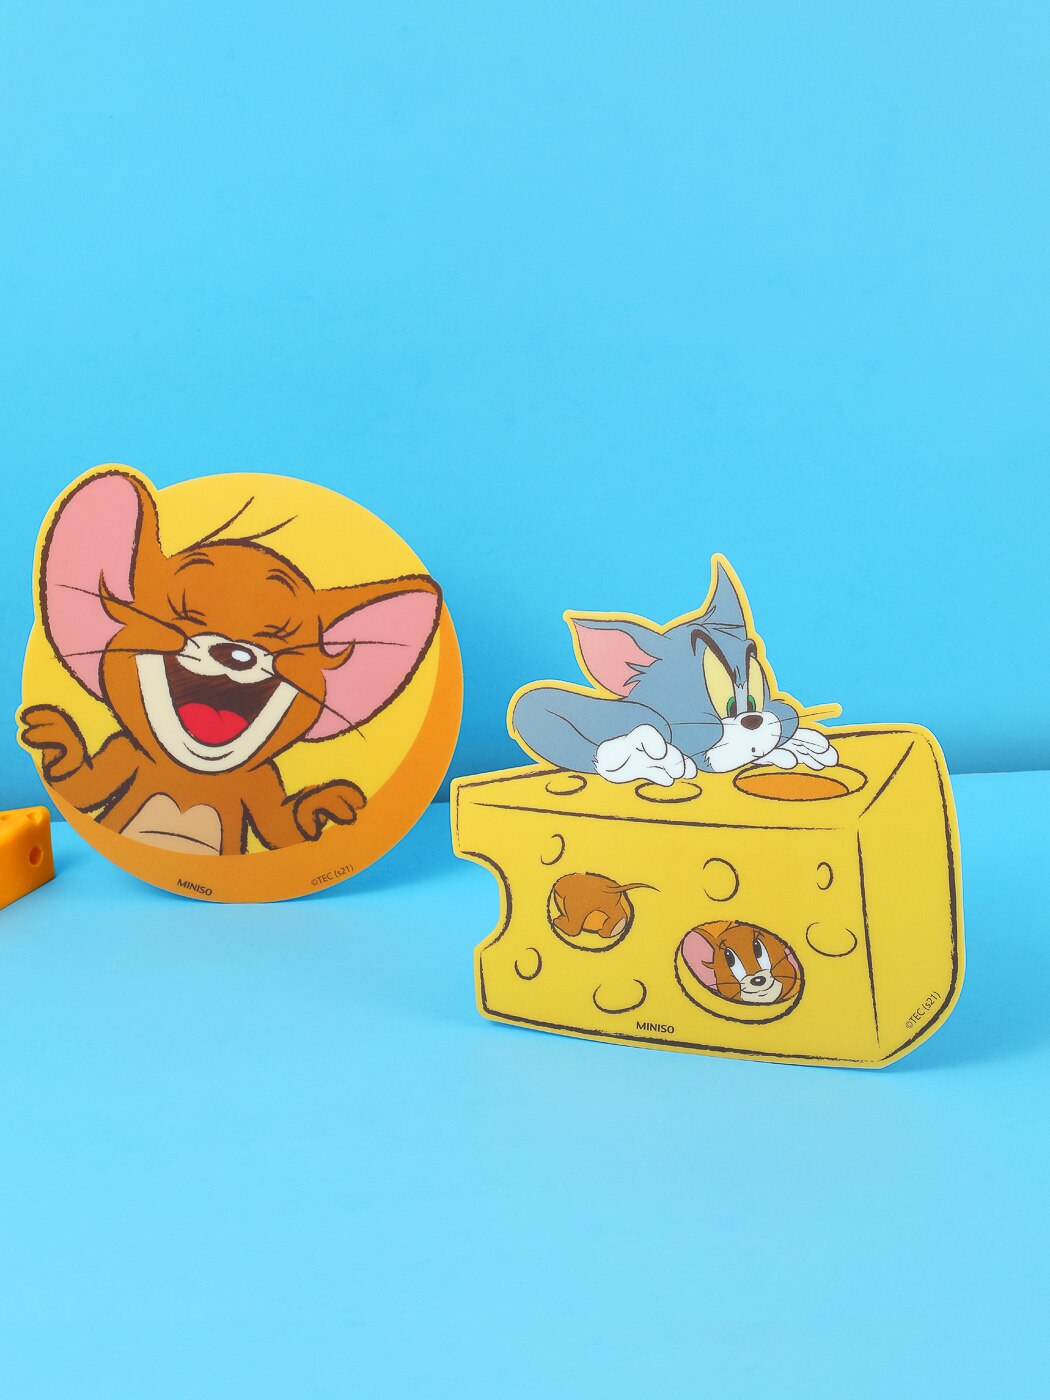 A cheese slice and two cartoon characters - Tom and Jerry